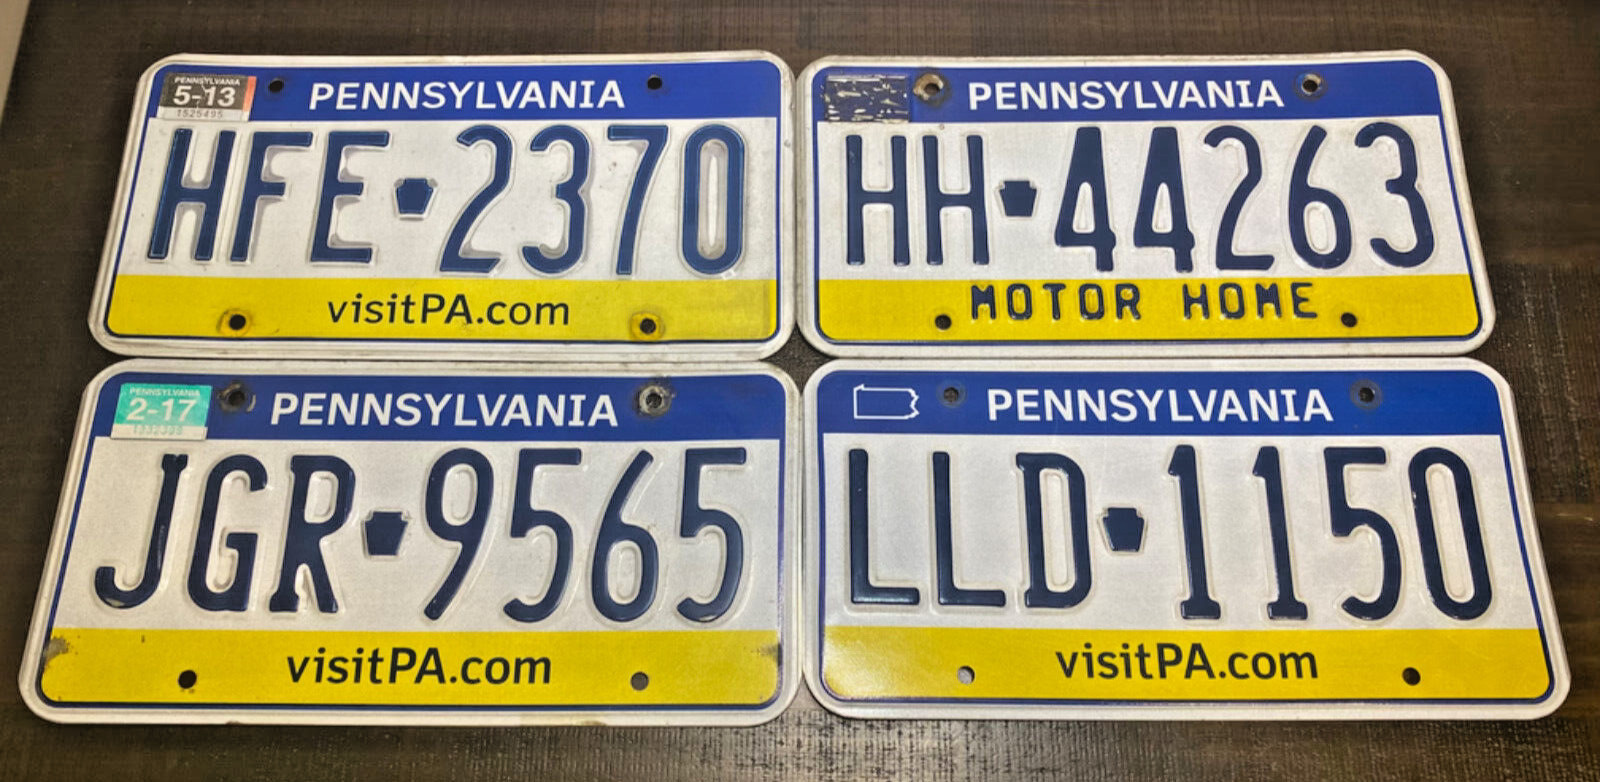 Lot of 4 Pennsylvania License Plates Expired Passenger Vehicles and Motor Home